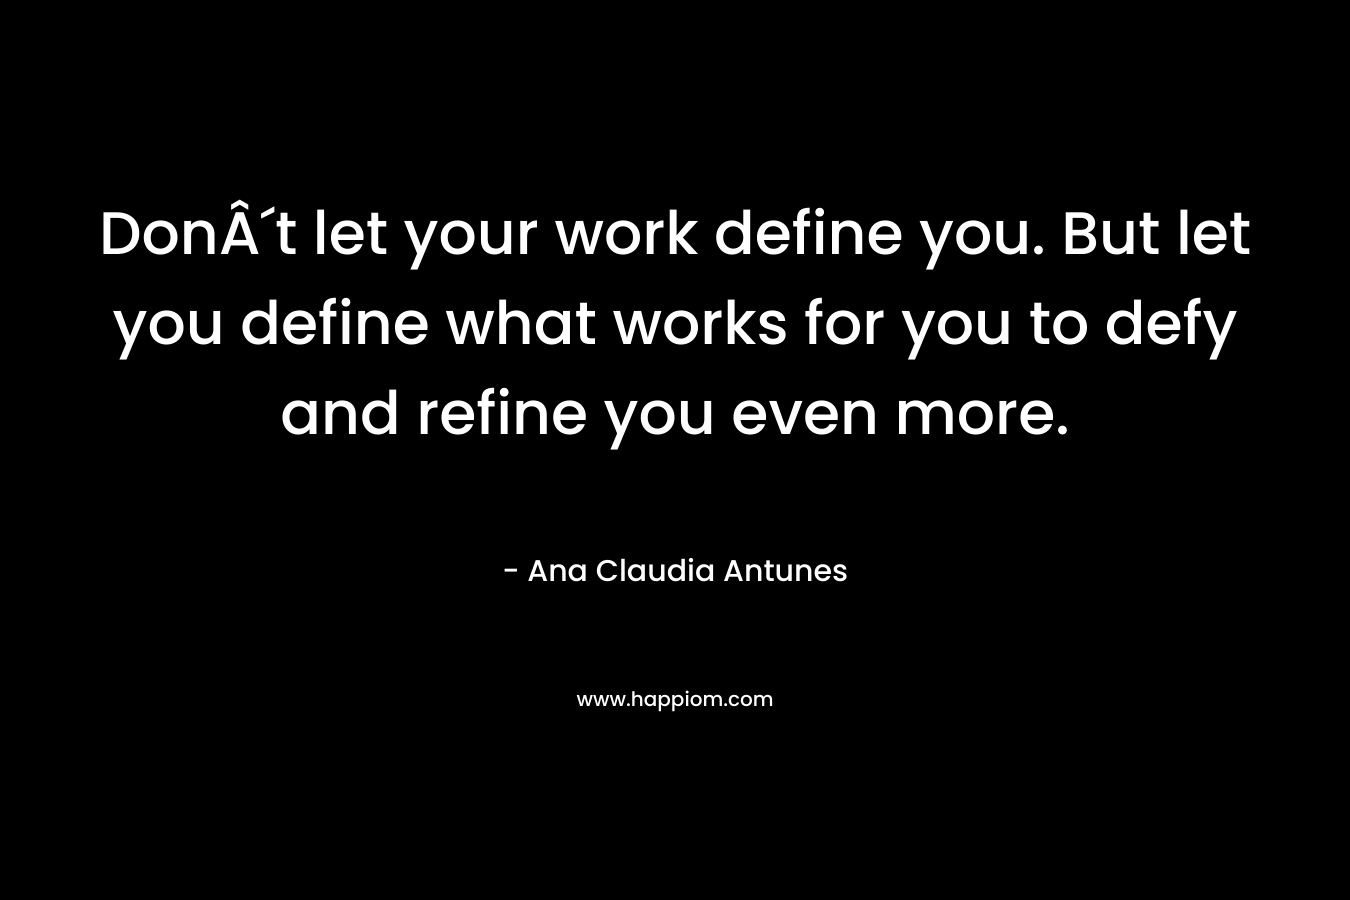 DonÂ´t let your work define you. But let you define what works for you to defy and refine you even more.